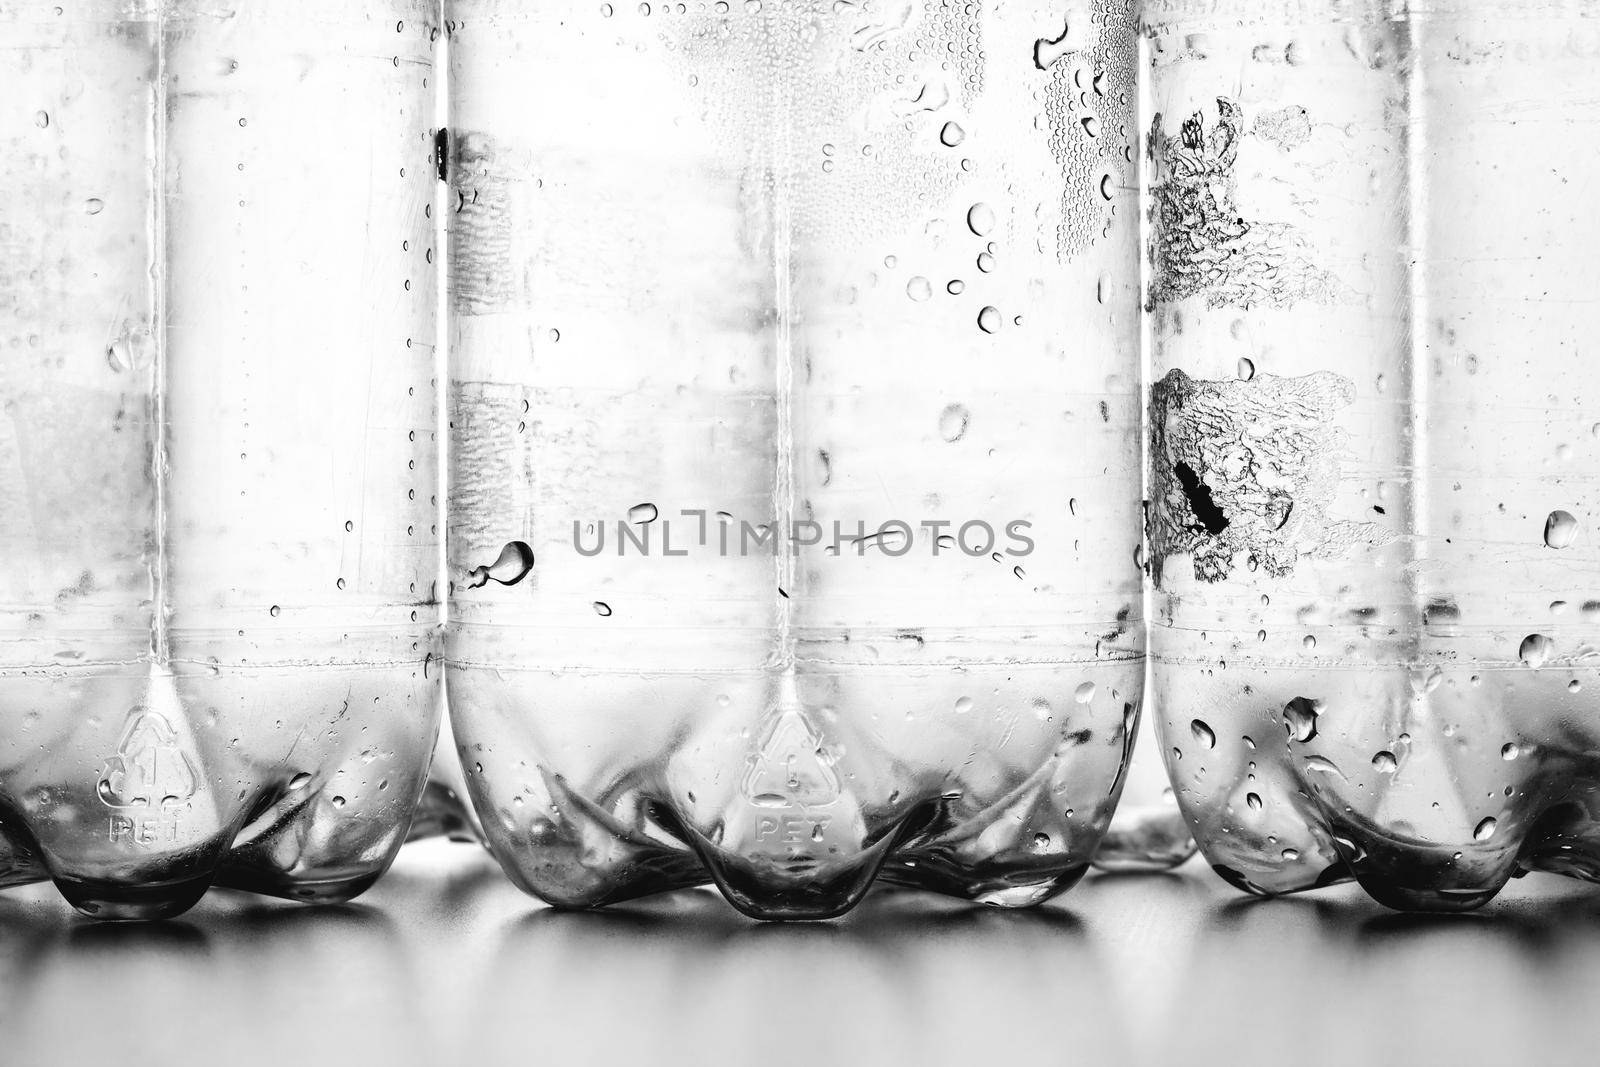 plastic bottles with condensation droplets abstract by kokimk